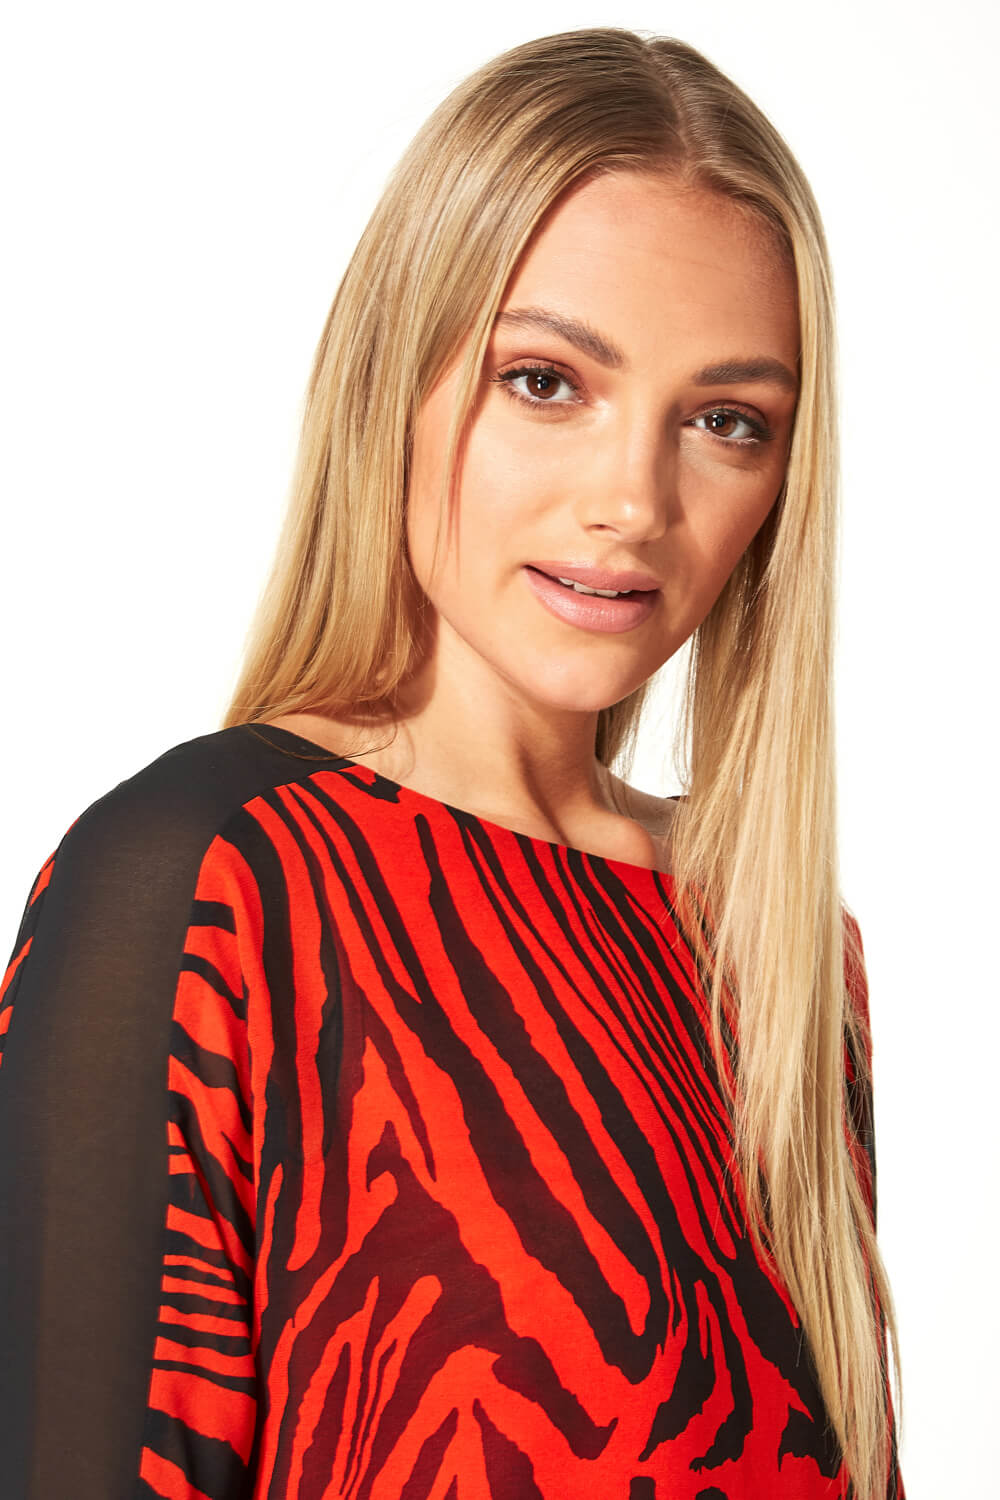 Red Animal Tiger Print 3/4 Sleeve Top, Image 4 of 5